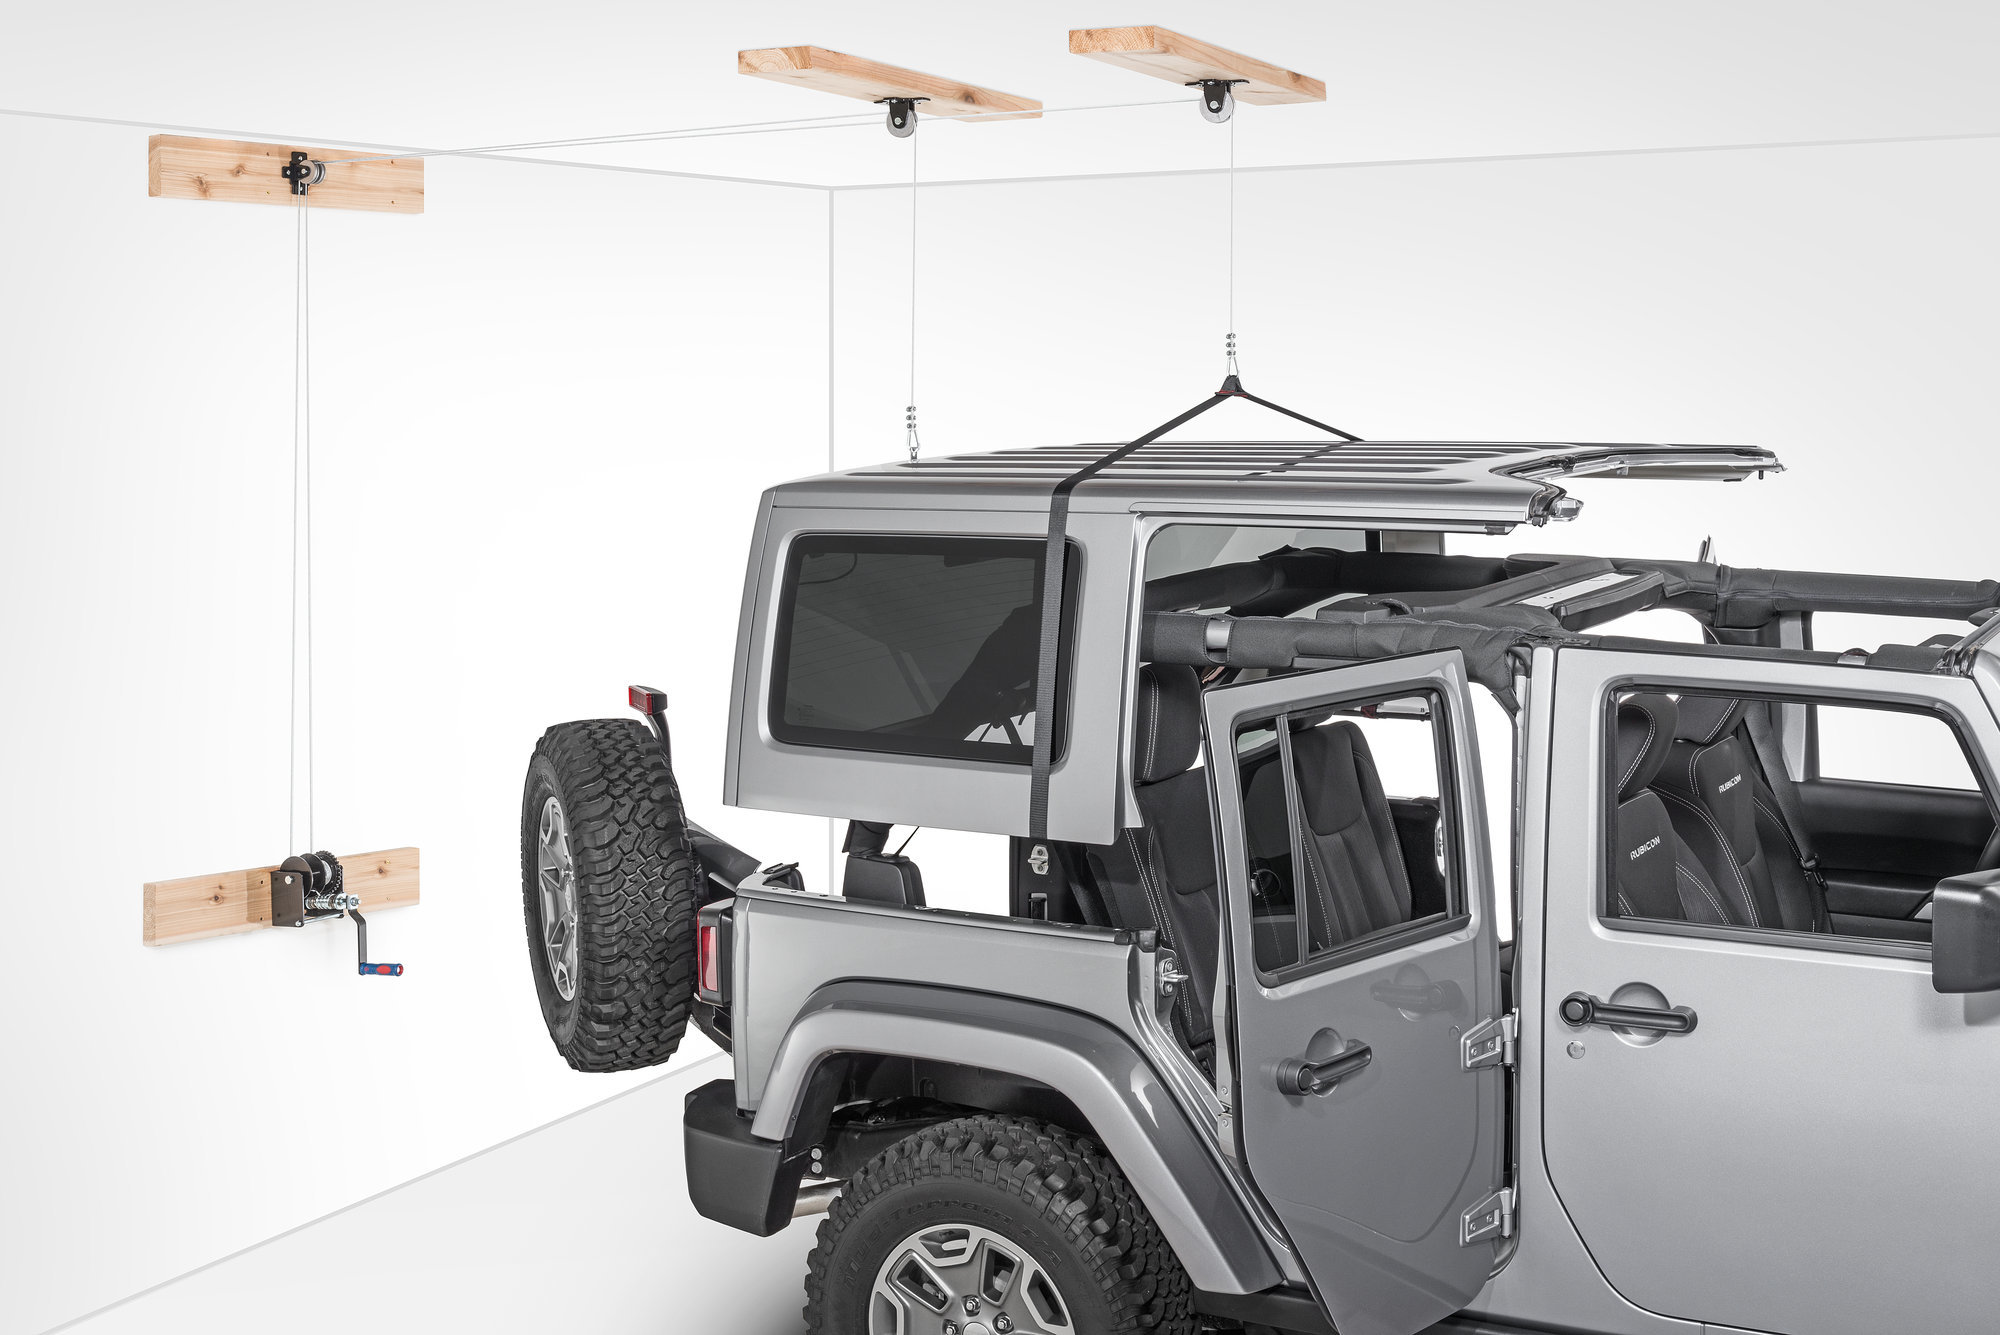 Markeret Analytiker visdom What Are The Differences In Jeep Hardtop Hoists? | Quadratec